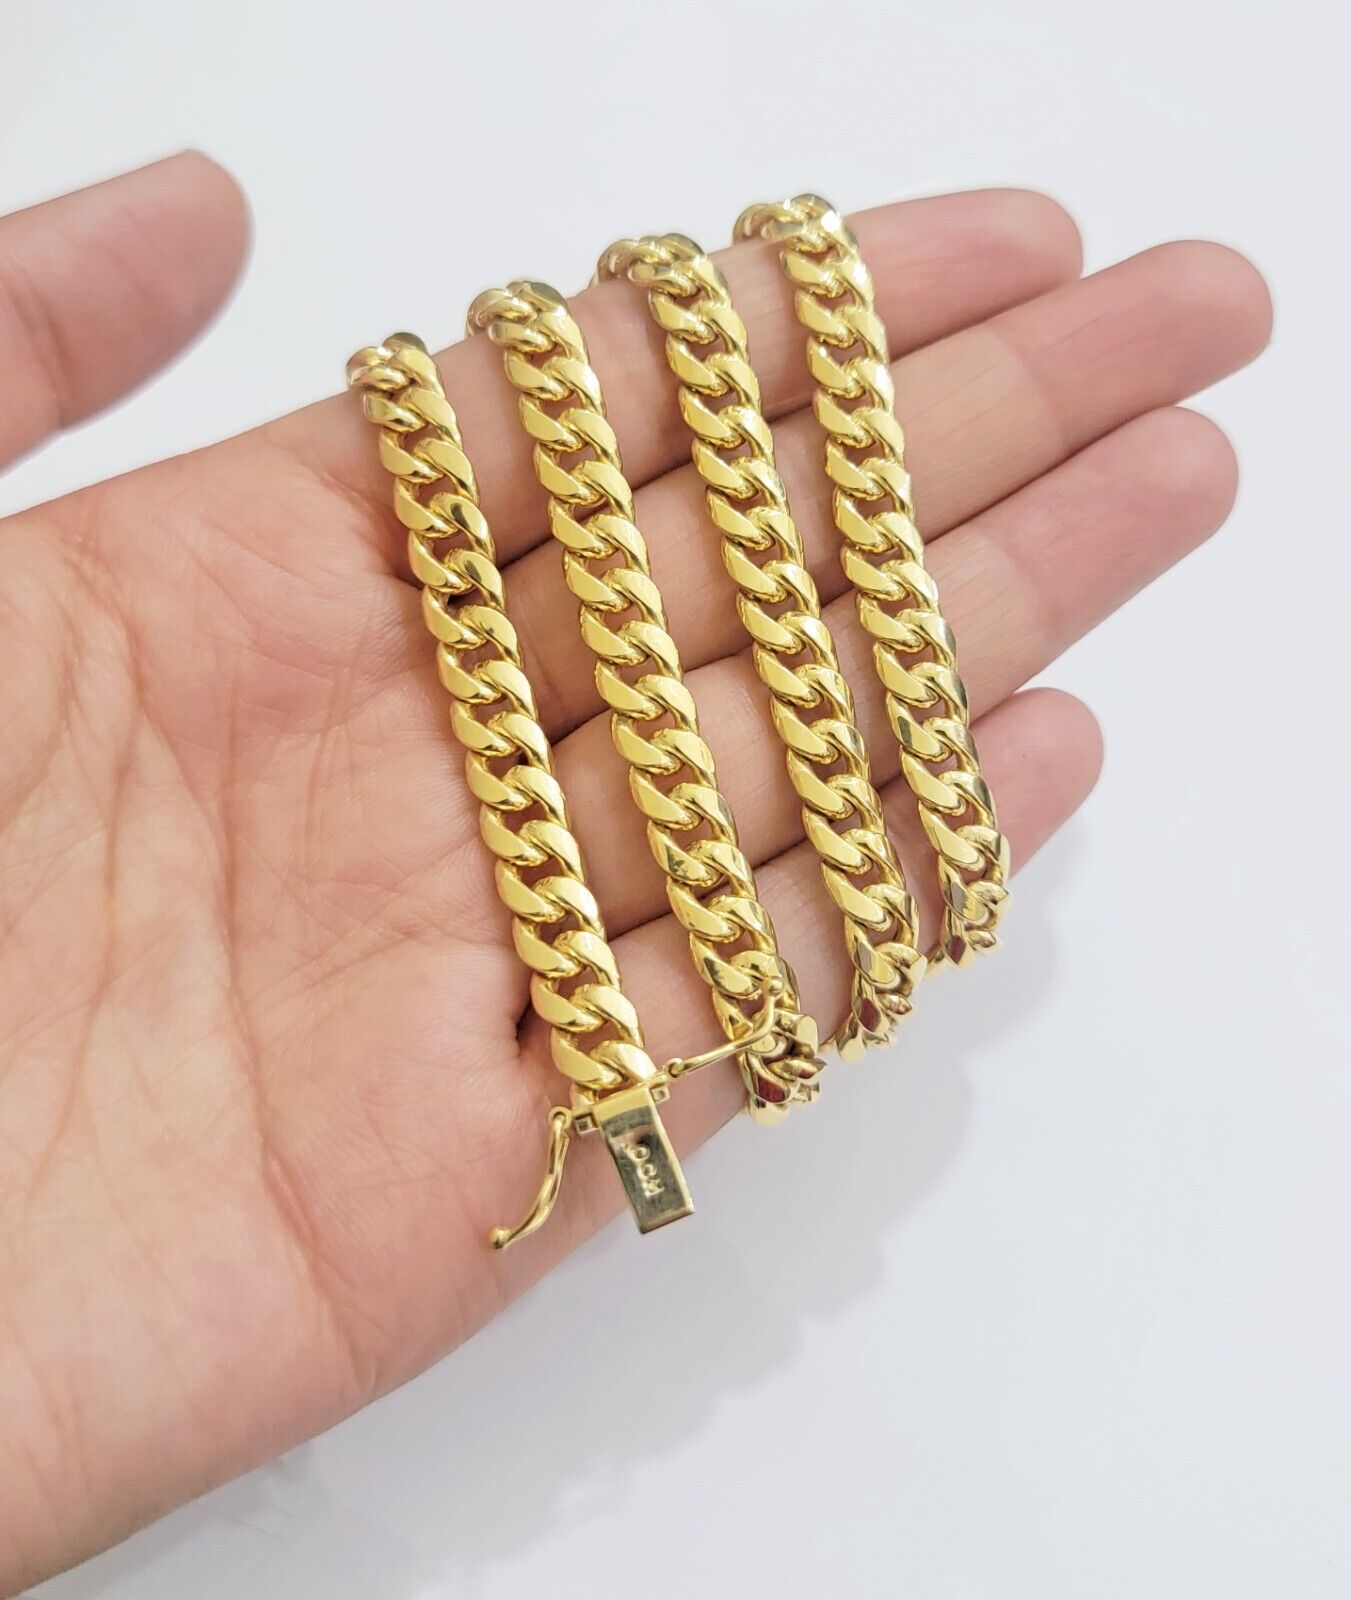 10k Gold Chain necklace 6mm Miami Cuban Link 20